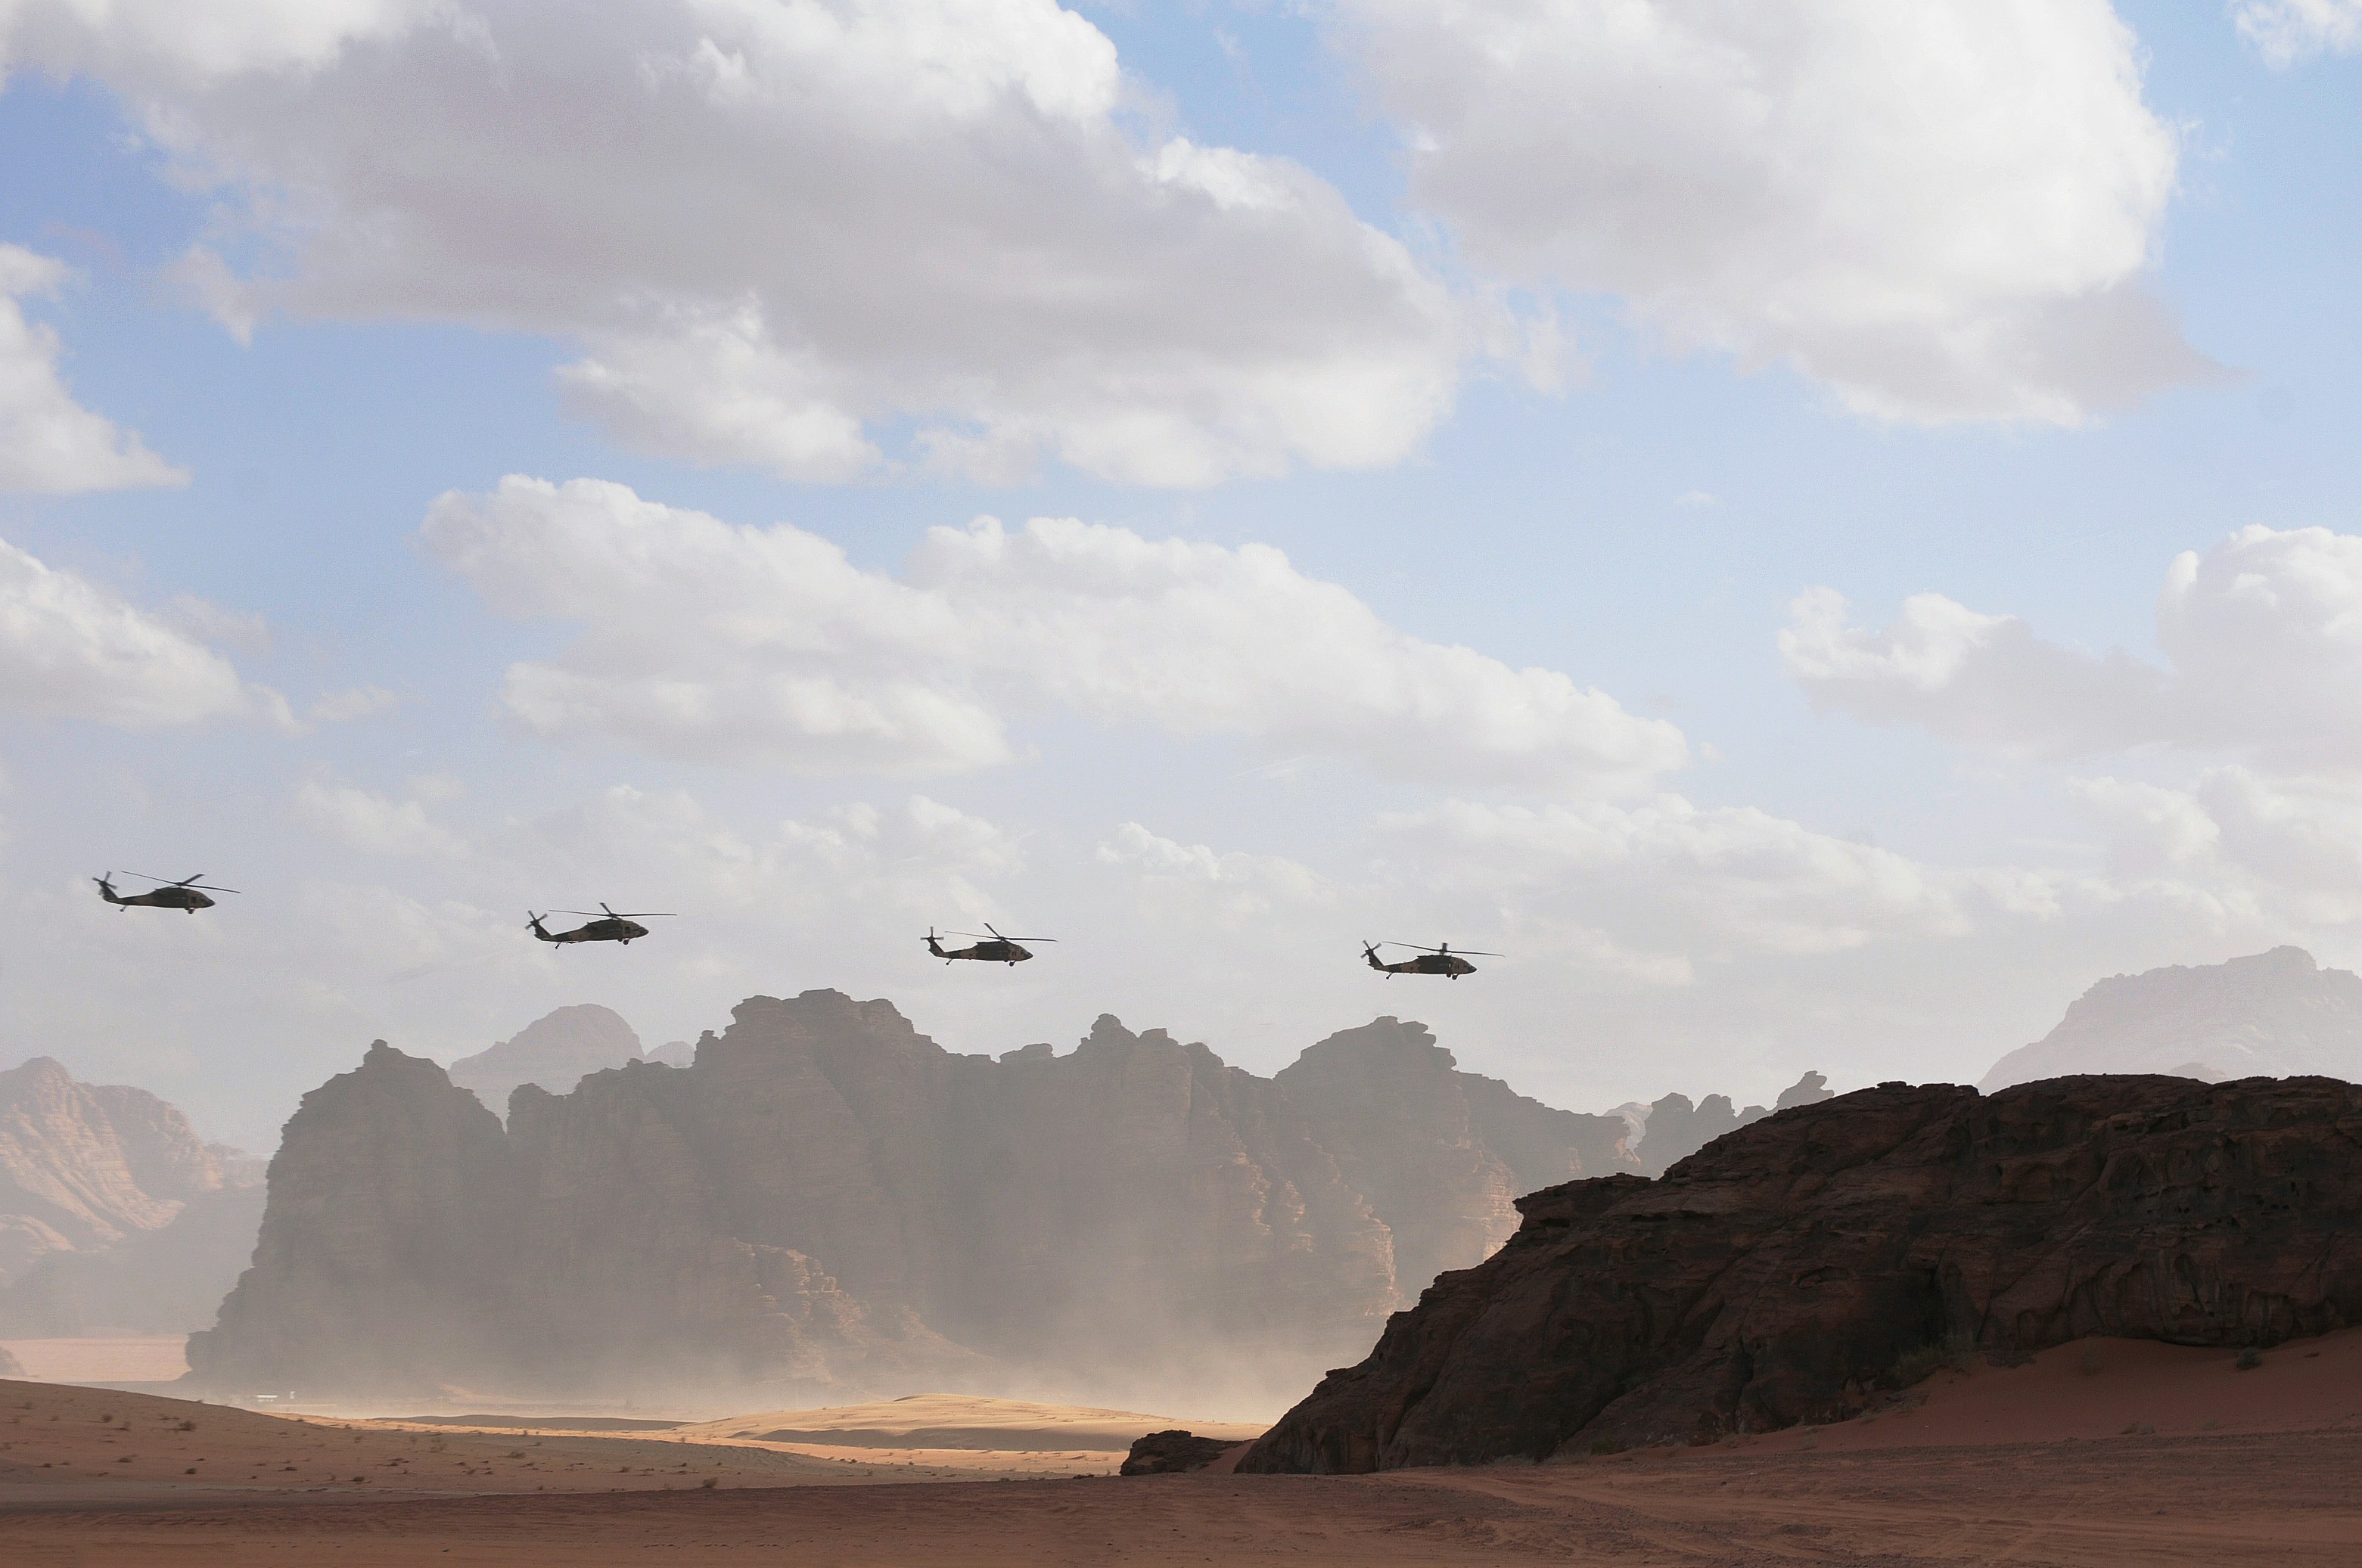 four helicopters in flight